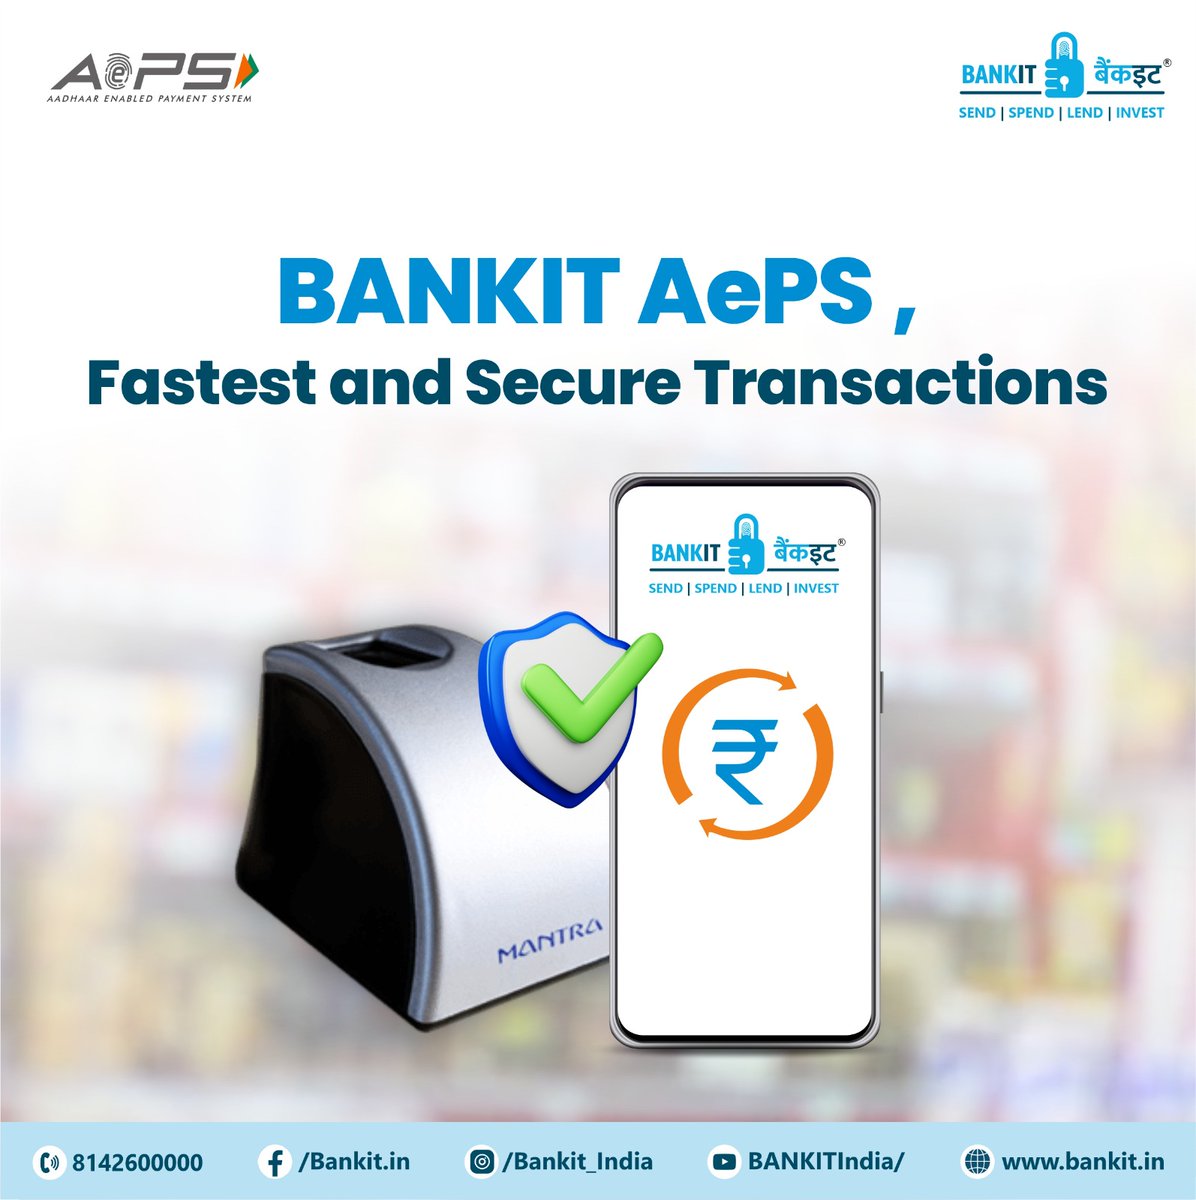 Reform your transactions with BANKIT AEPS -Experience unparalleled speed and security! #FasterPayments #SecureBanking #AEPS #BankingInnovation #DigitalTransformation